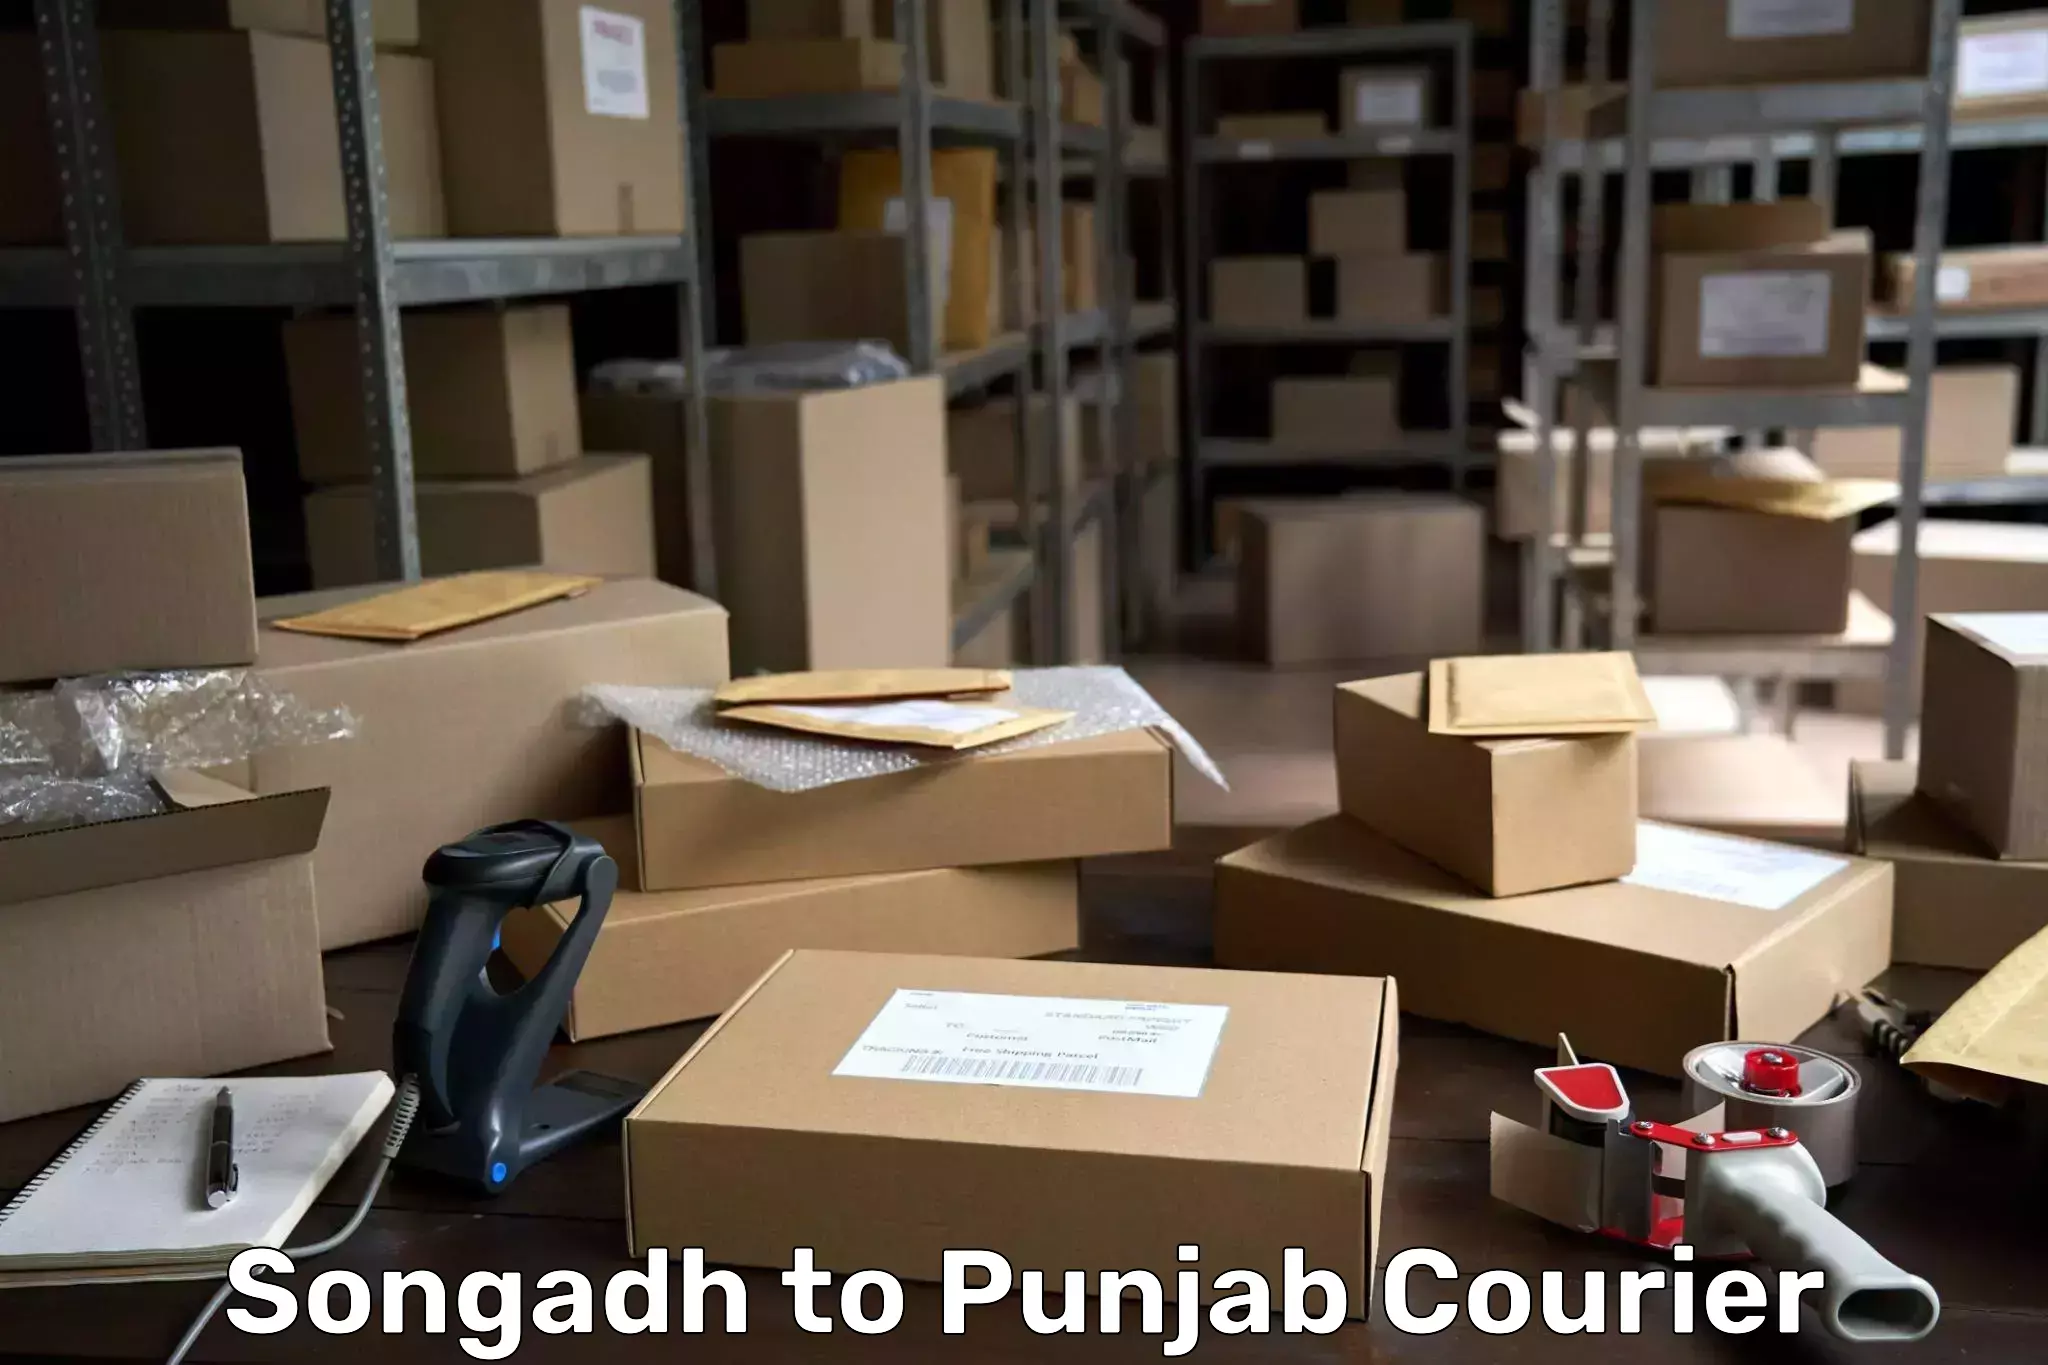 Courier service efficiency Songadh to Fatehgarh Sahib